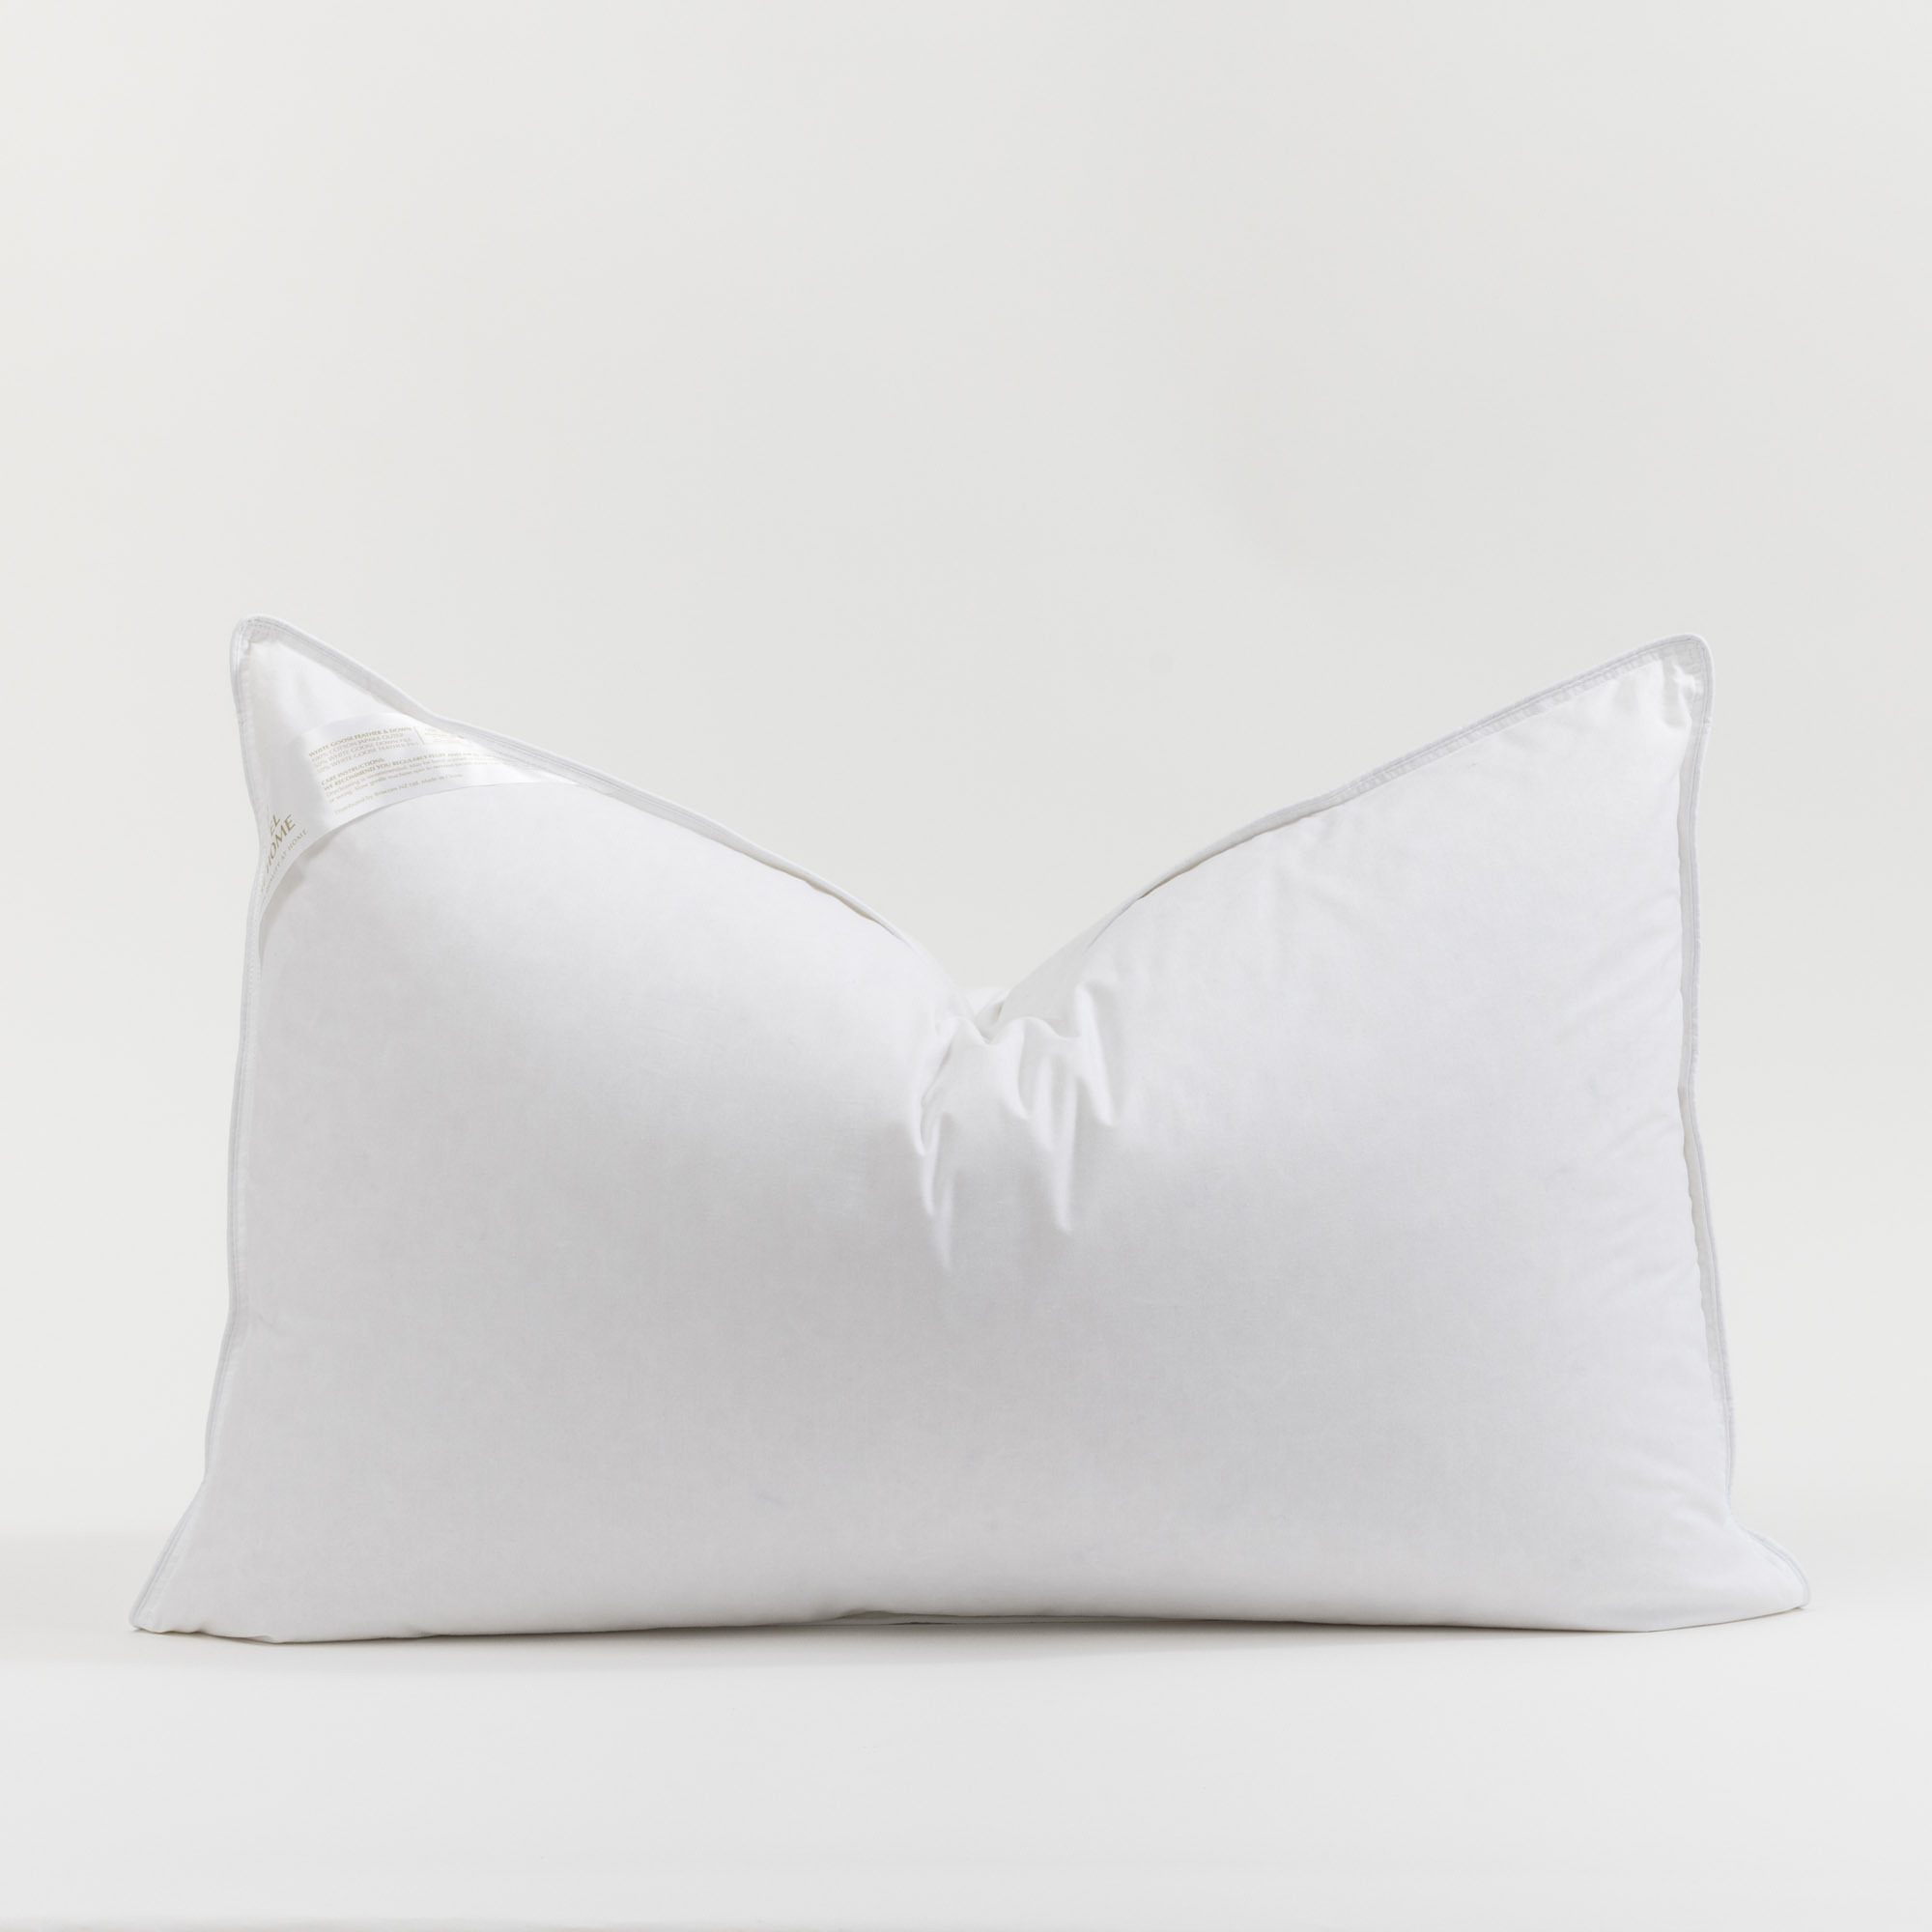 Hotel At Home 50/50 Goose Down Pillow Soft